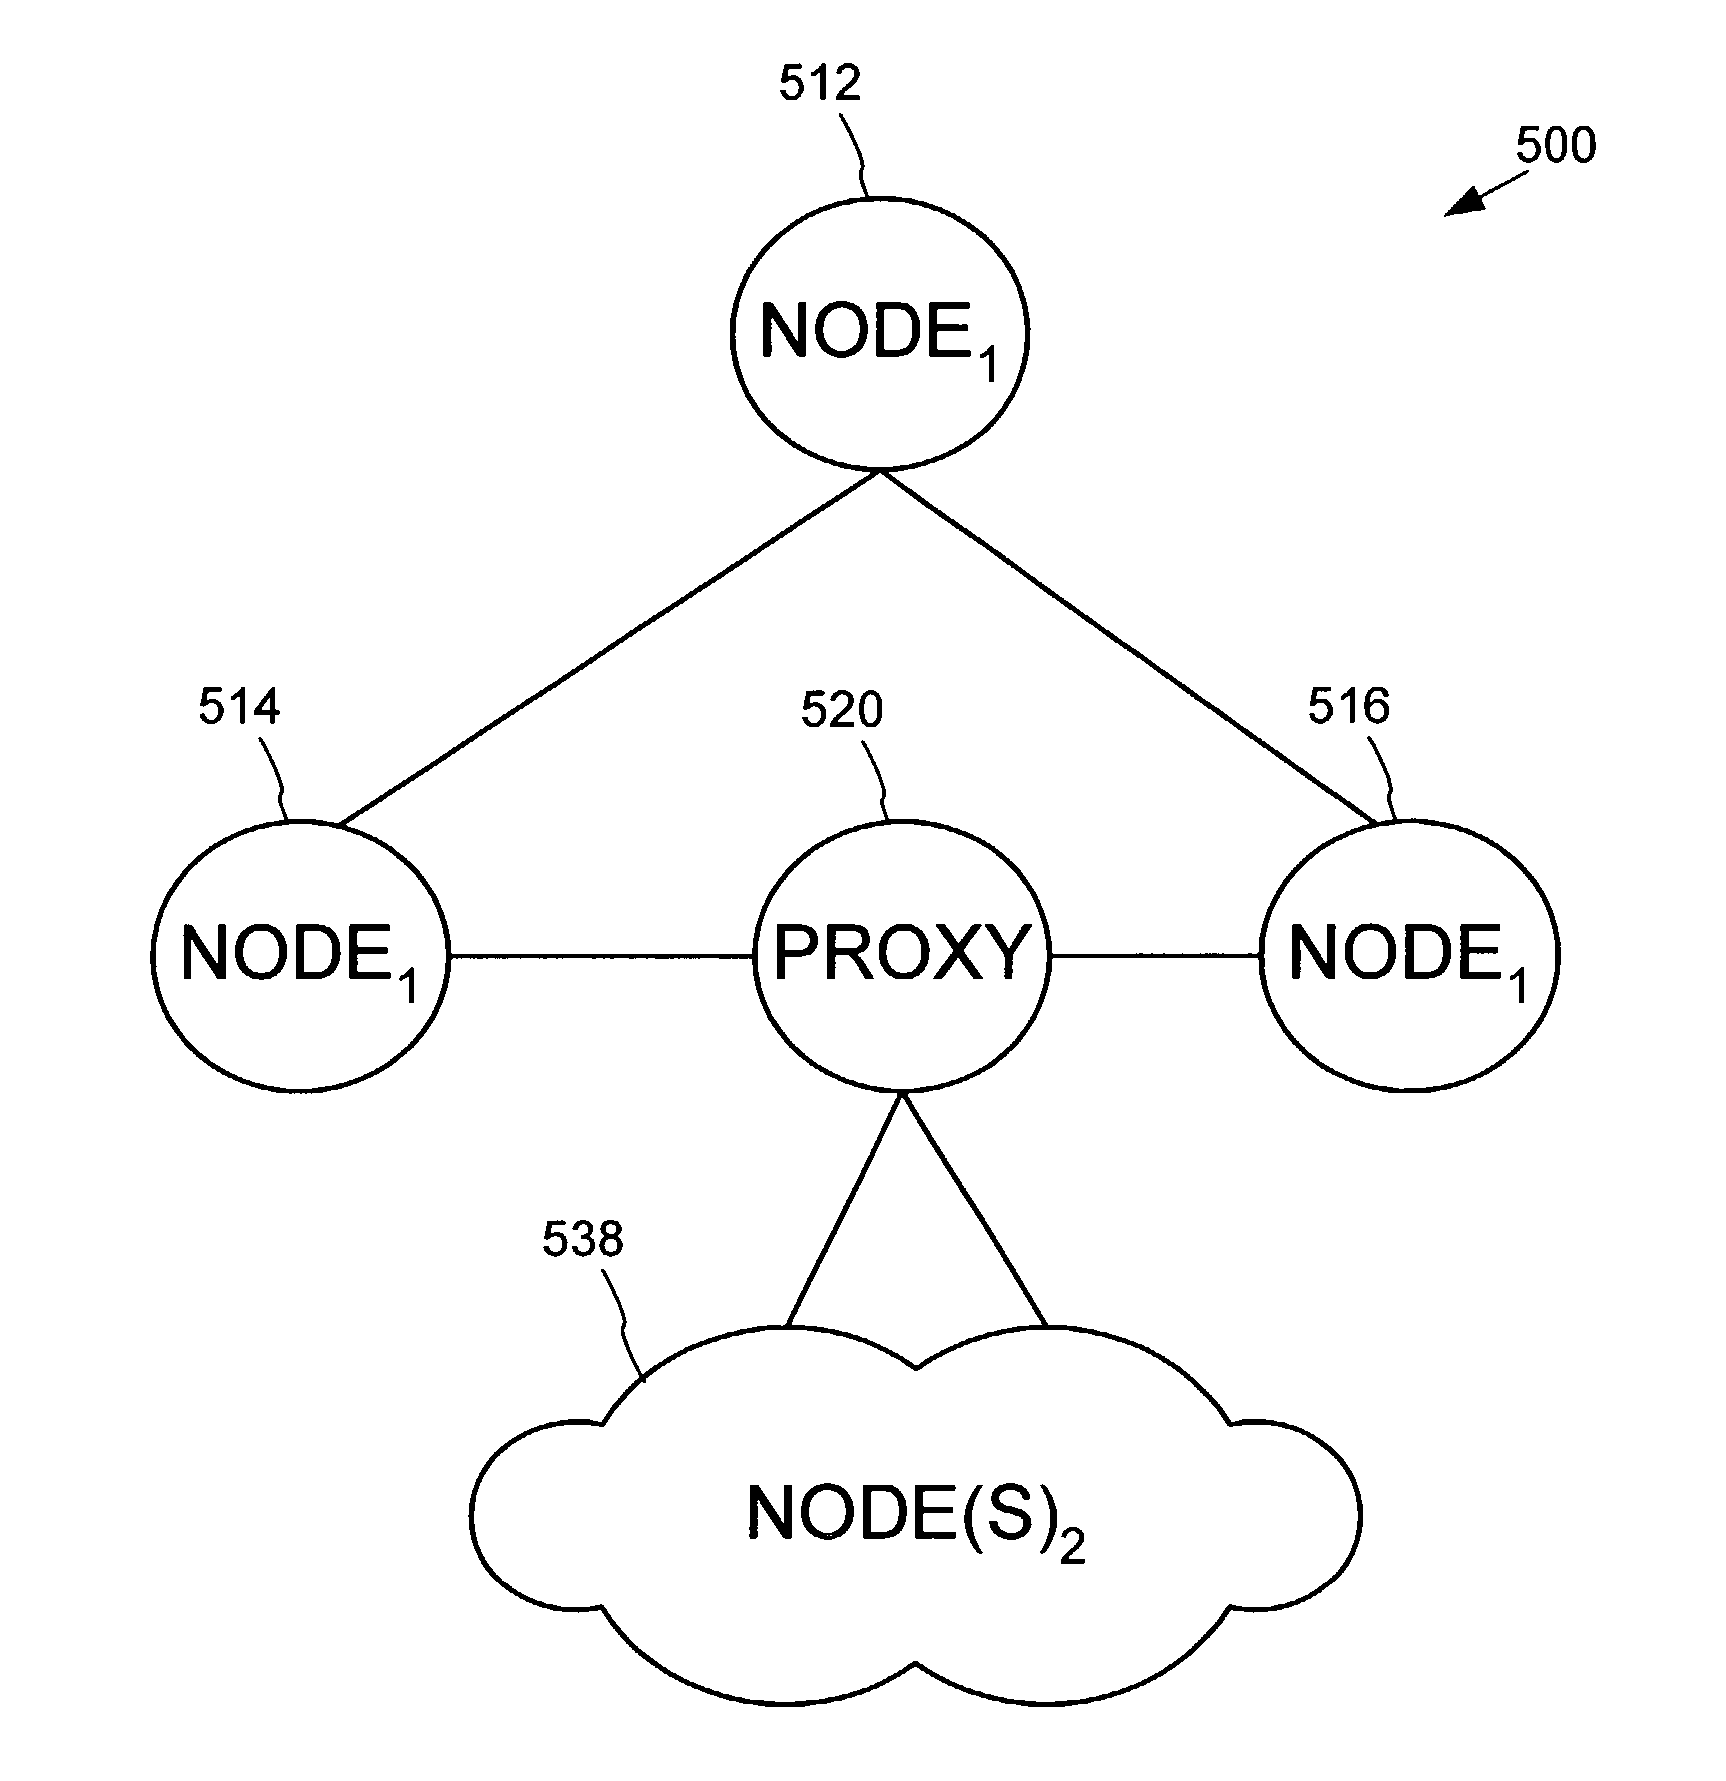 Hybrid tree for mixed user interface elements and sequential data